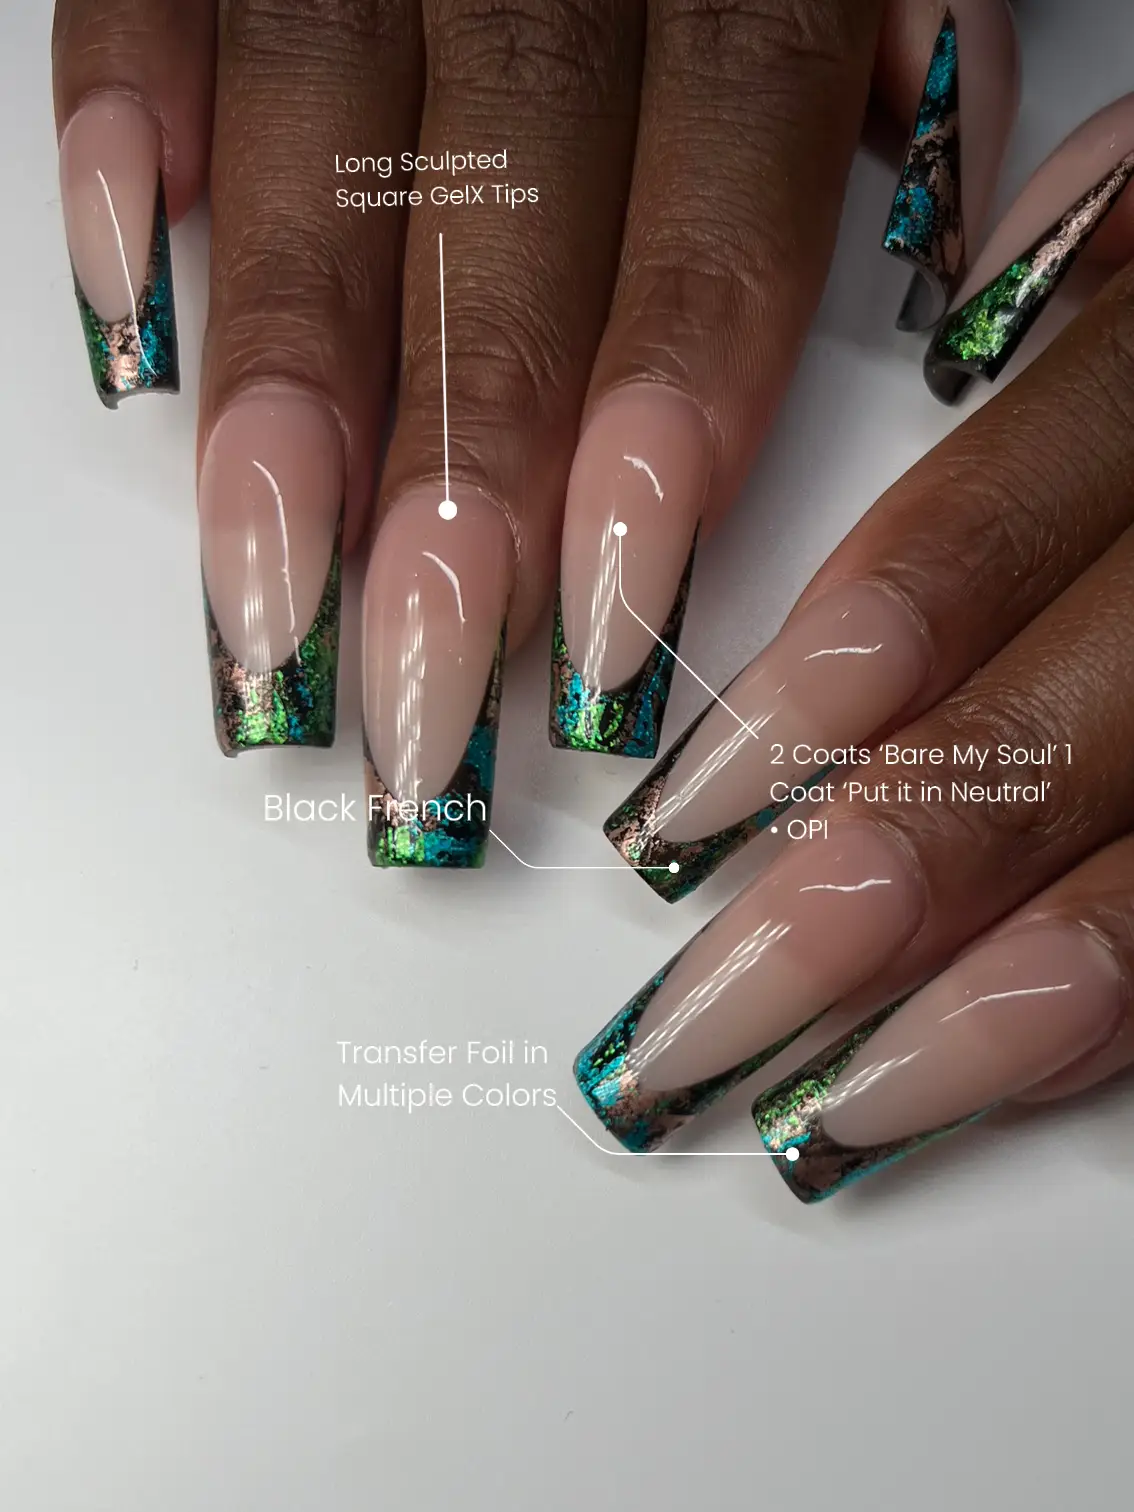 Foil Frenchies for the win 🙌🏼, Gallery posted by LV Nail Artist